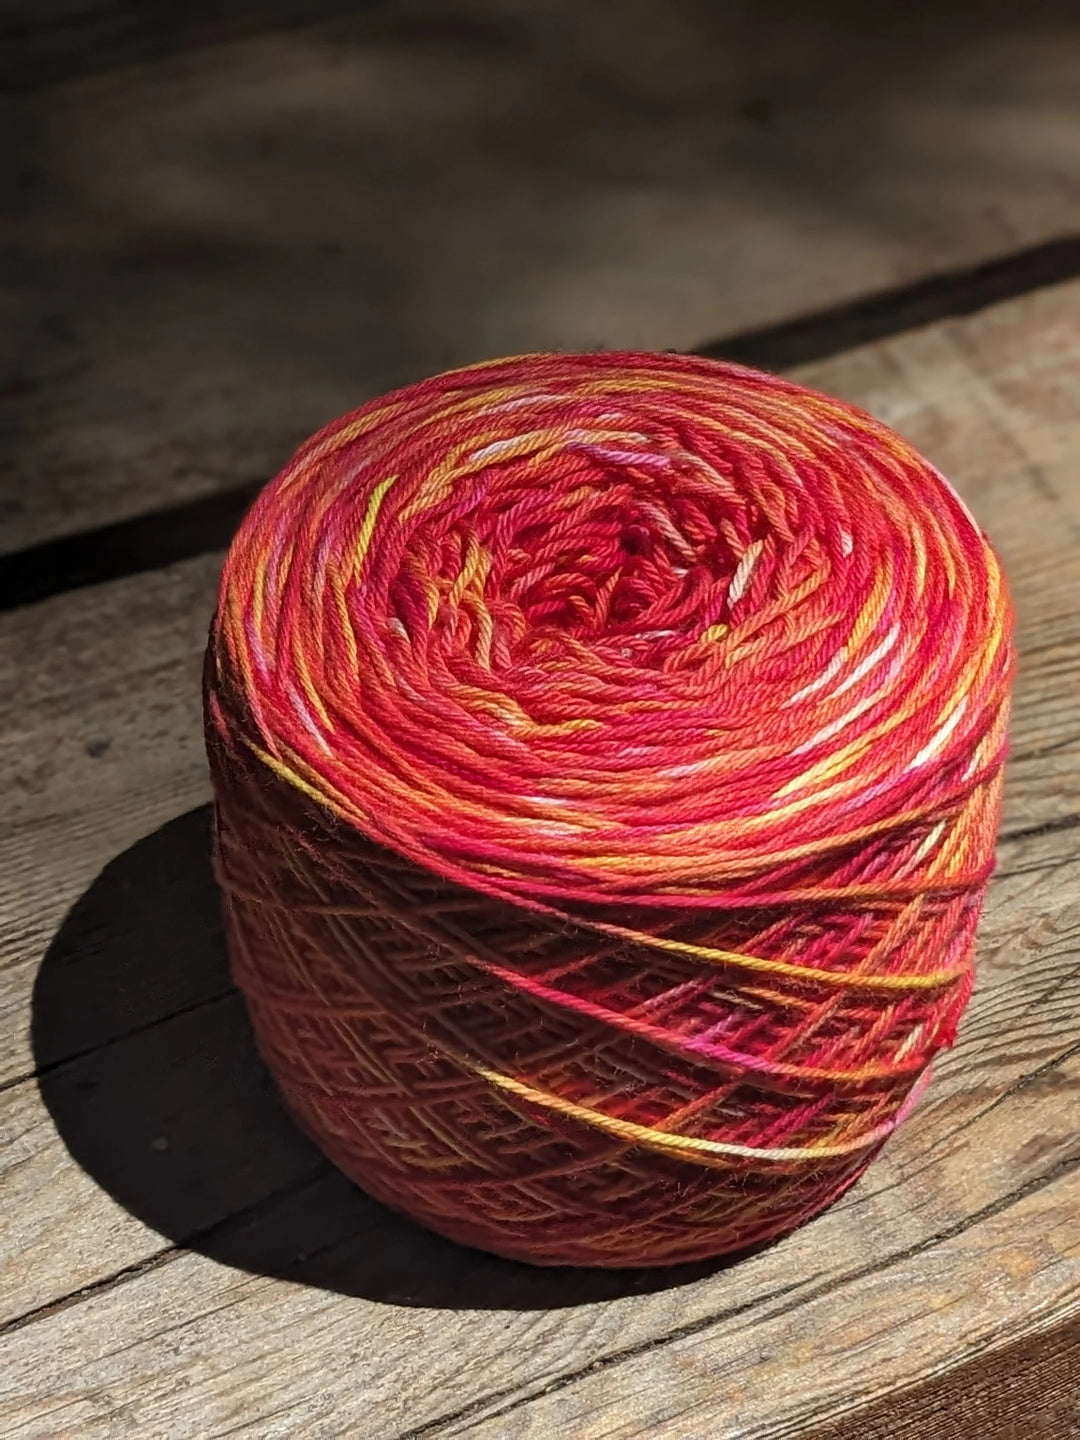 Hand Dyed yarn - Cotton